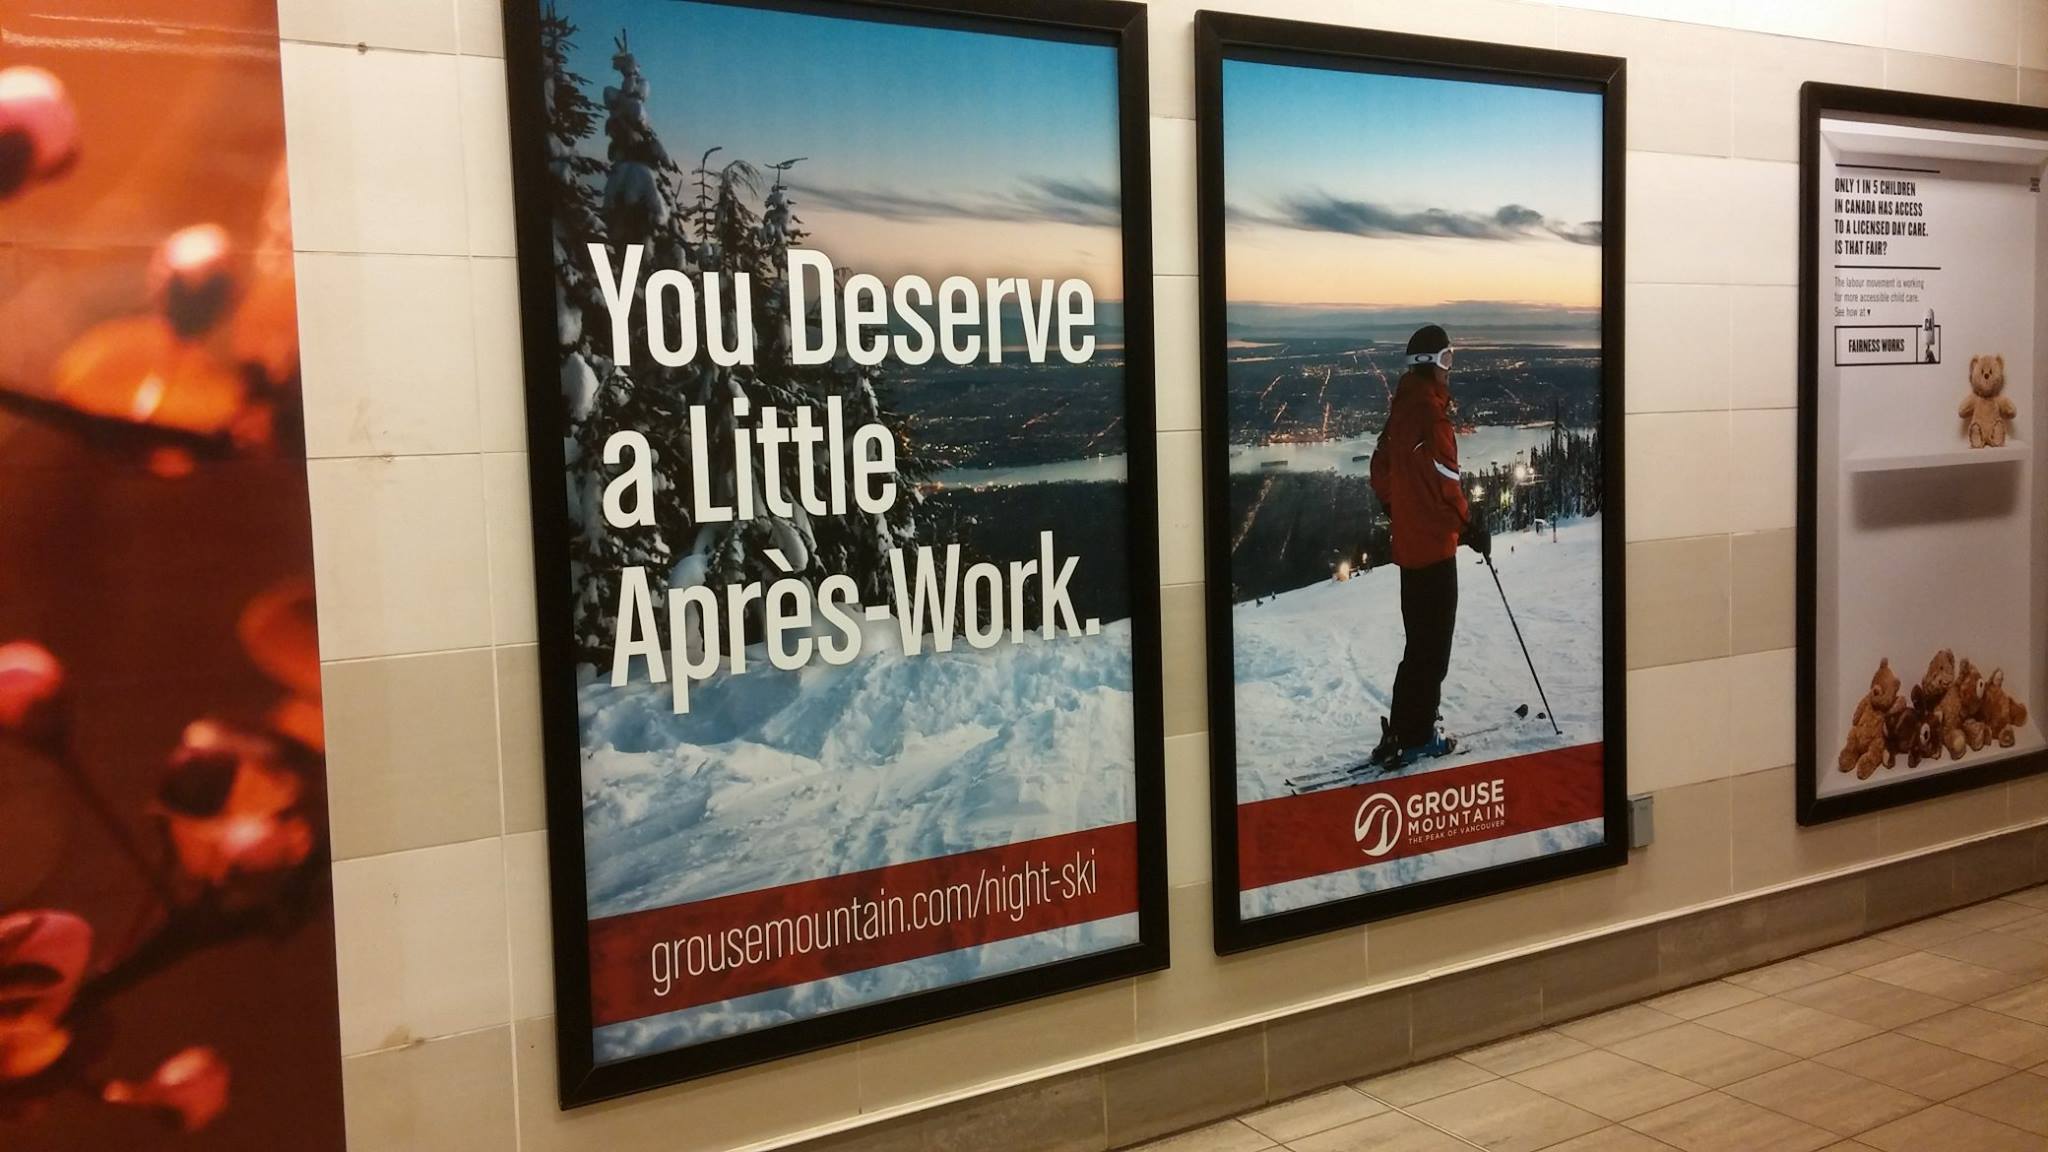 An ad for skiing, saying, &quot;You deserve a little après-work.&quot;